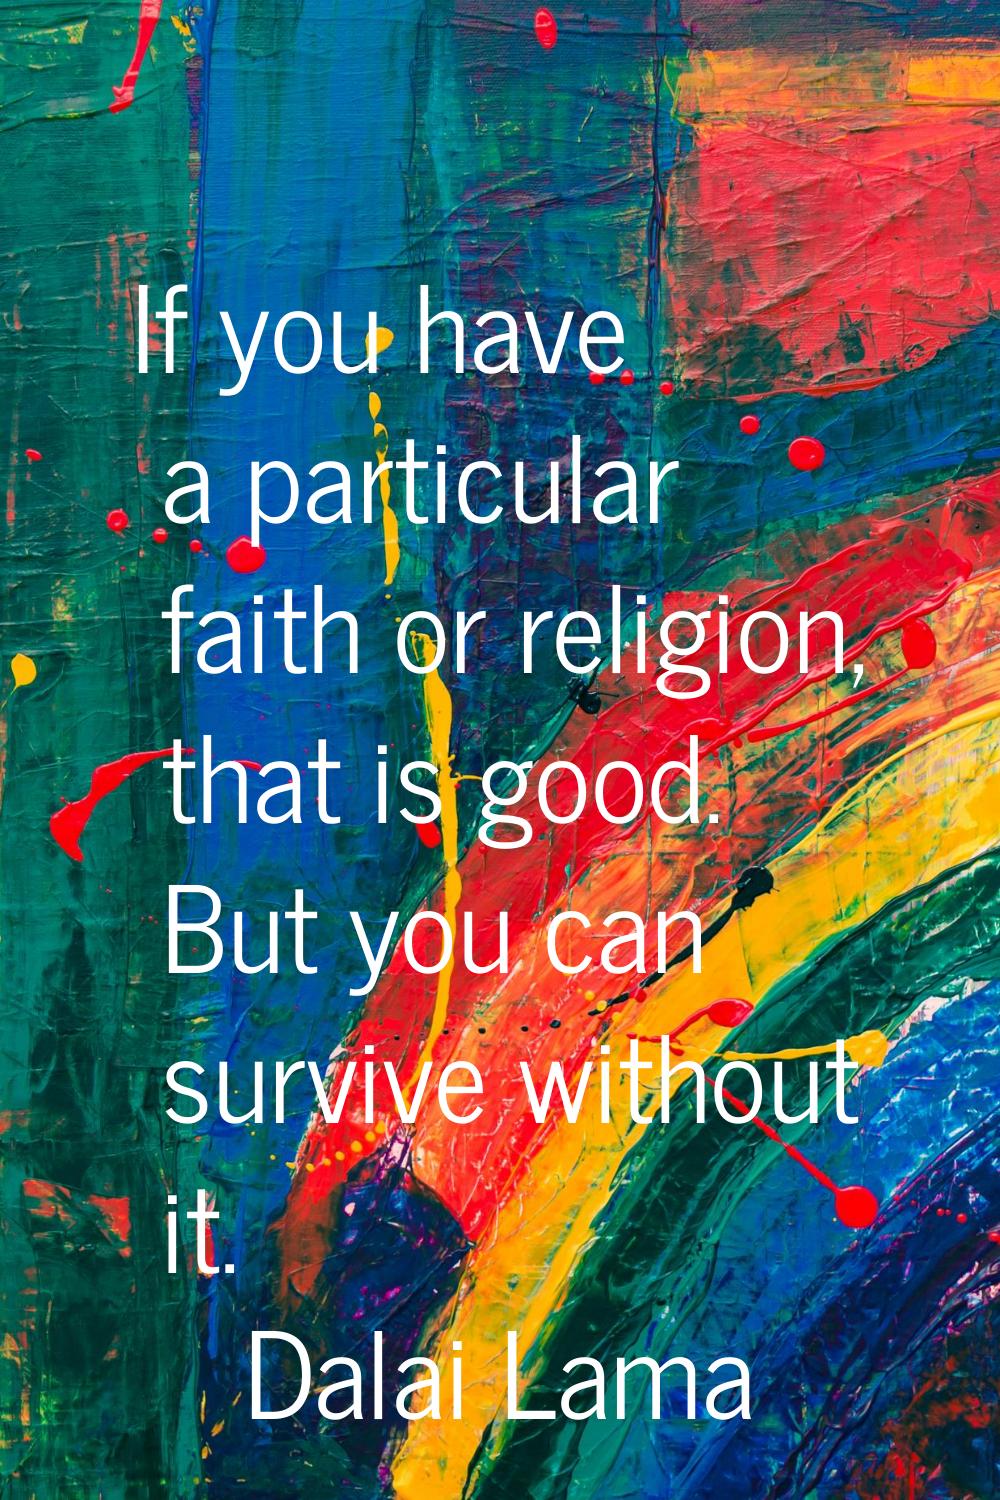 If you have a particular faith or religion, that is good. But you can survive without it.